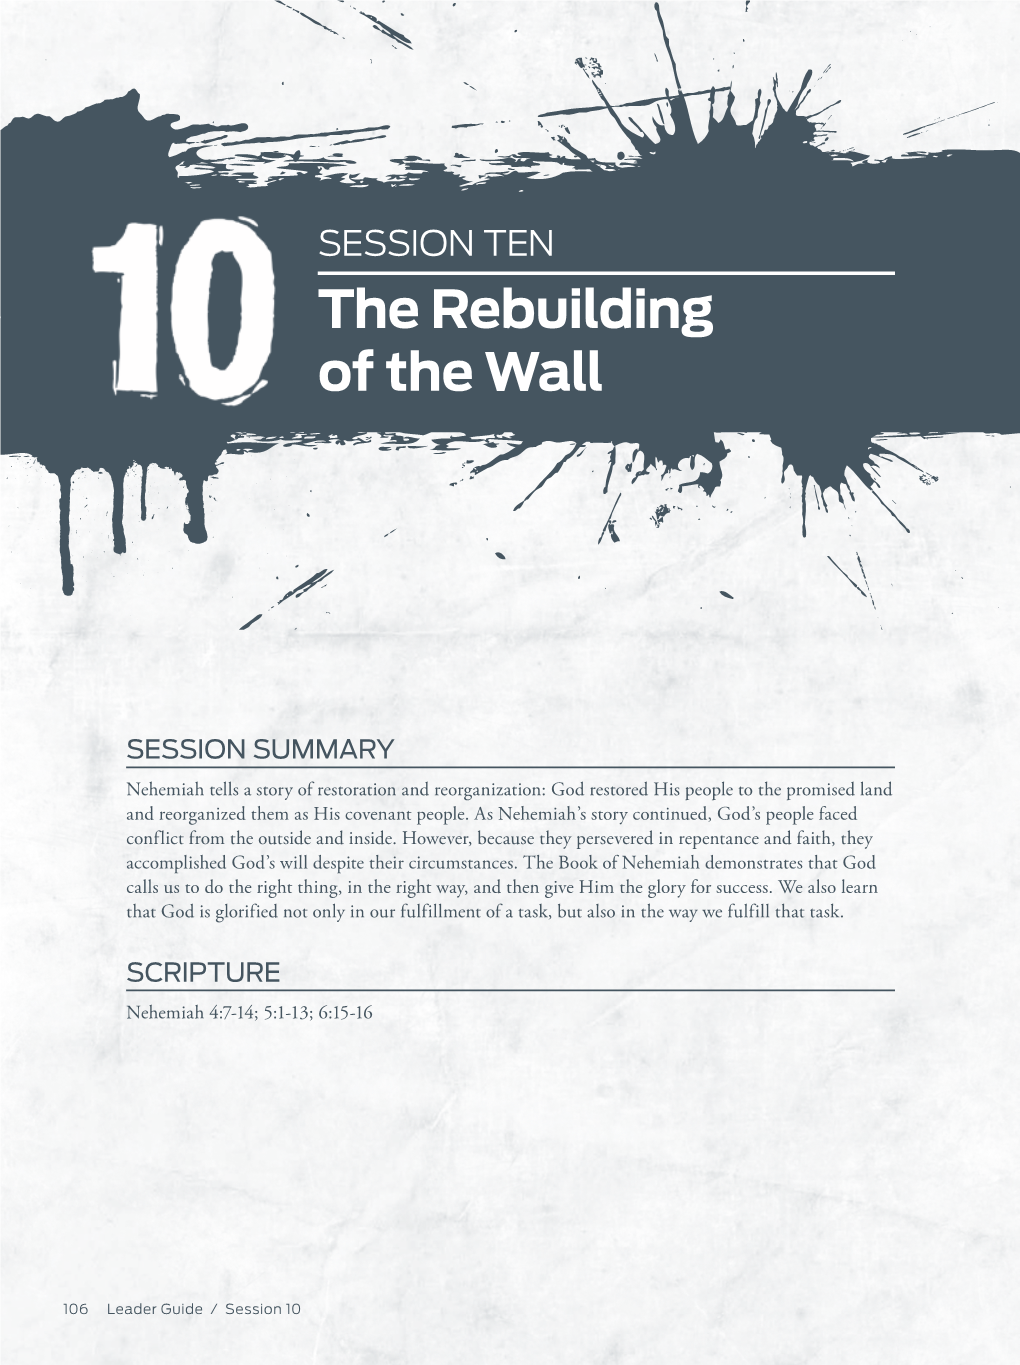 The Rebuilding of the Wall